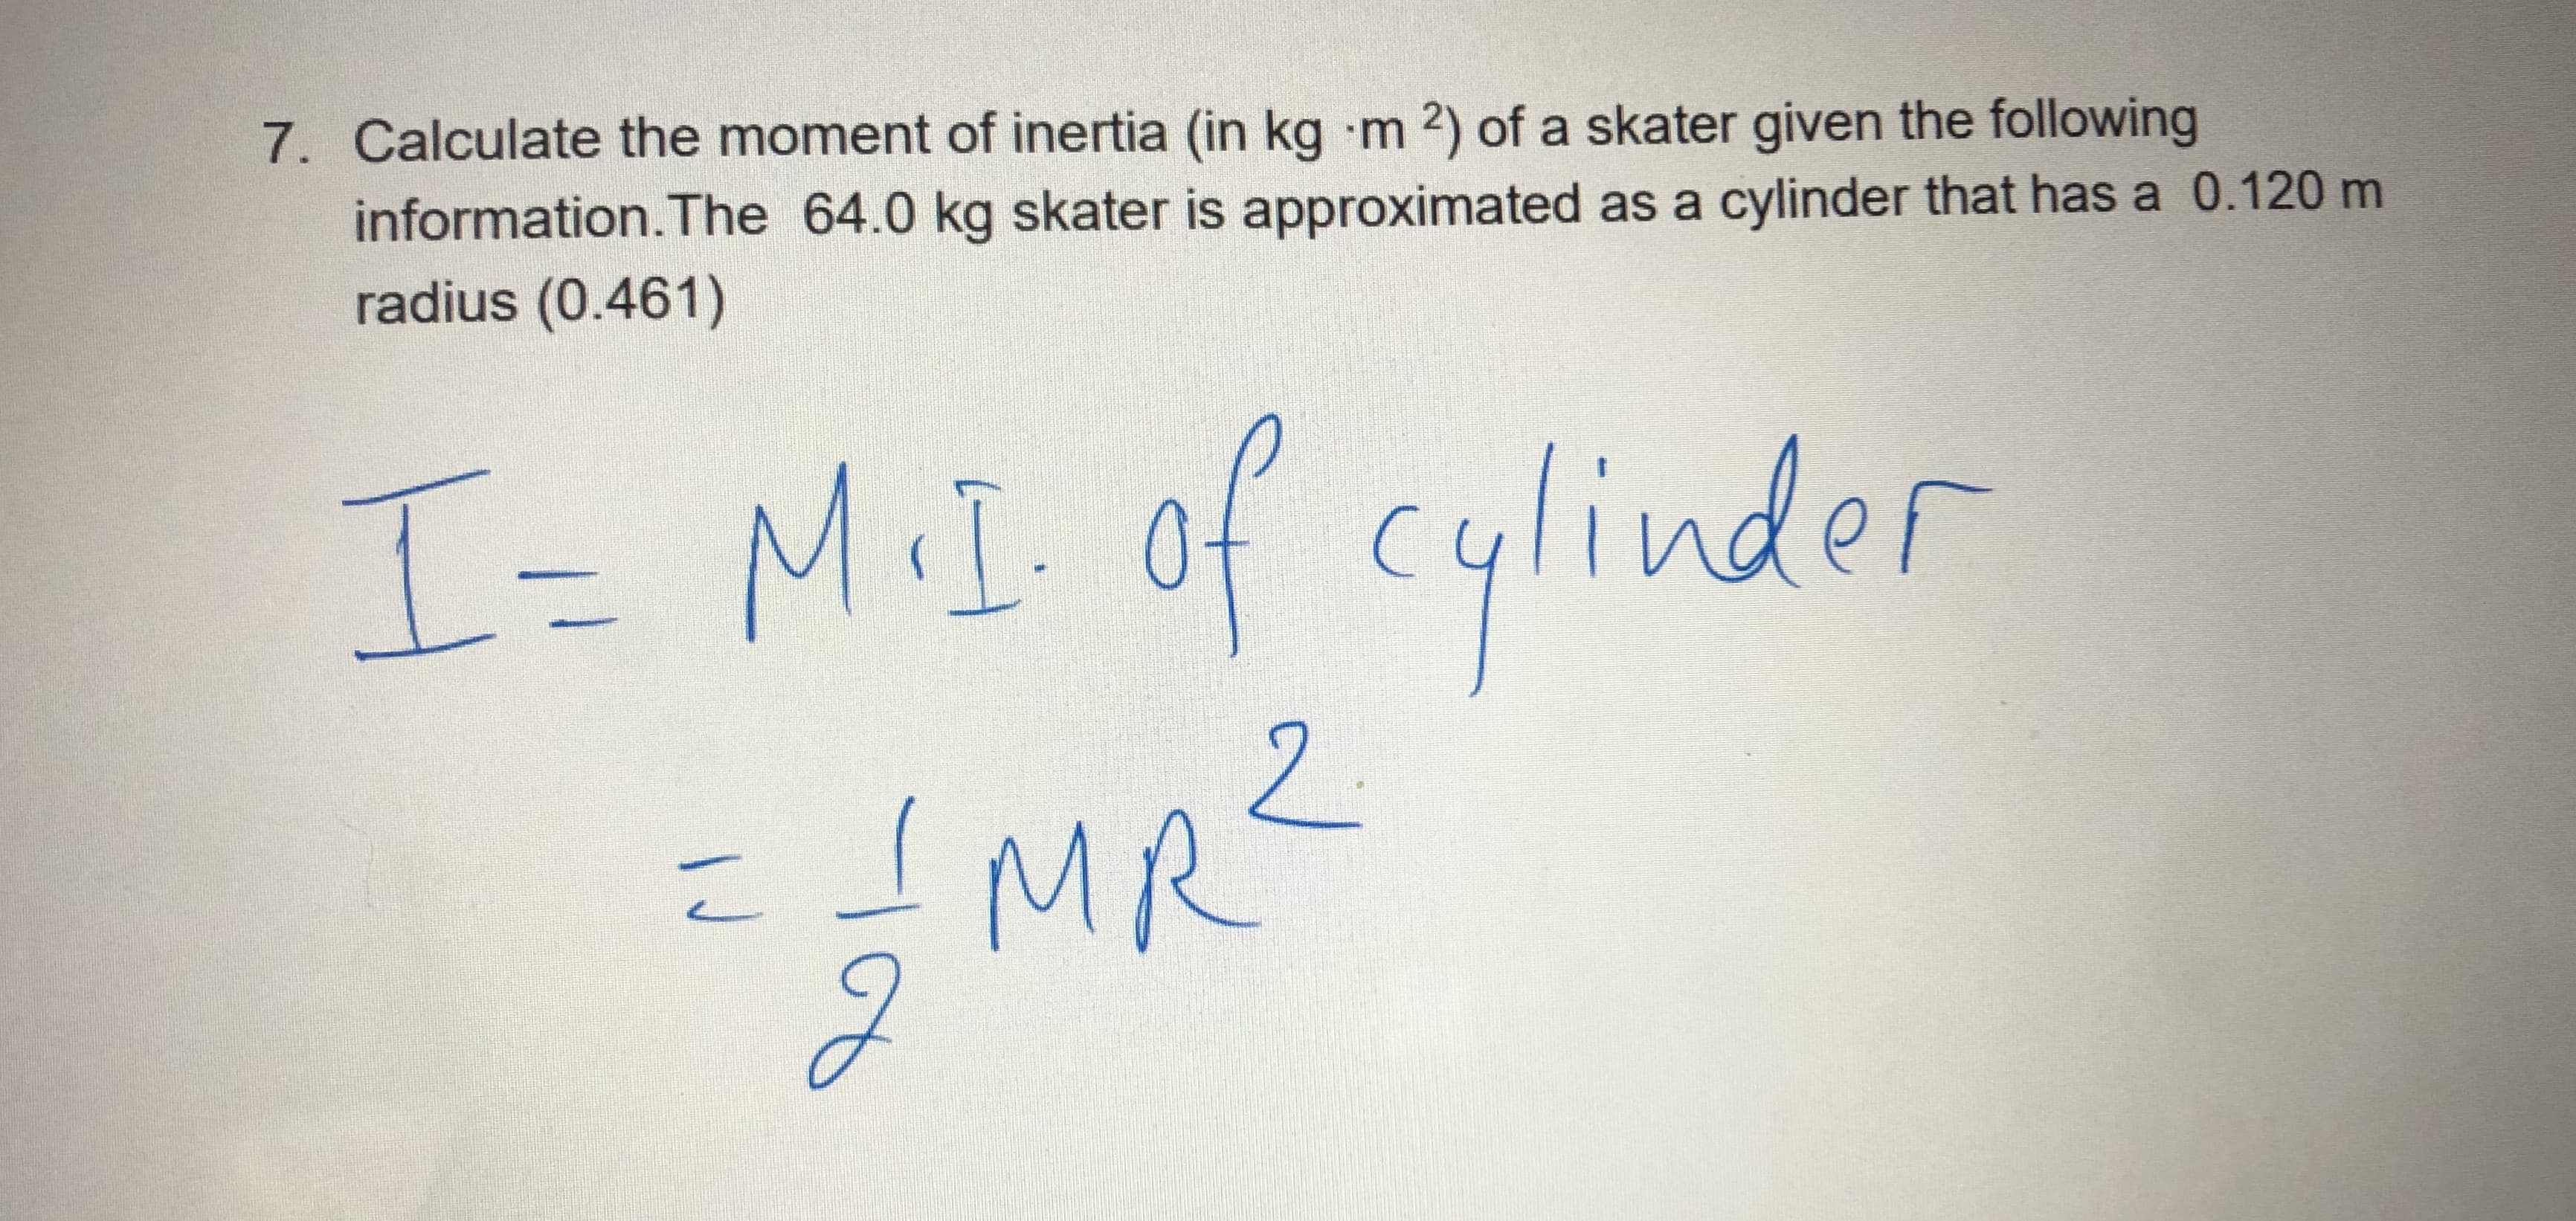 7. Calculate the moment of inertia (in kg m 2) of a skater given the following
information.The 64.0 kg skater is approximated as a cylinder that has a 0.120 m
radius (0.461)
I=
M.I. of cylinder
2.
IMR'
